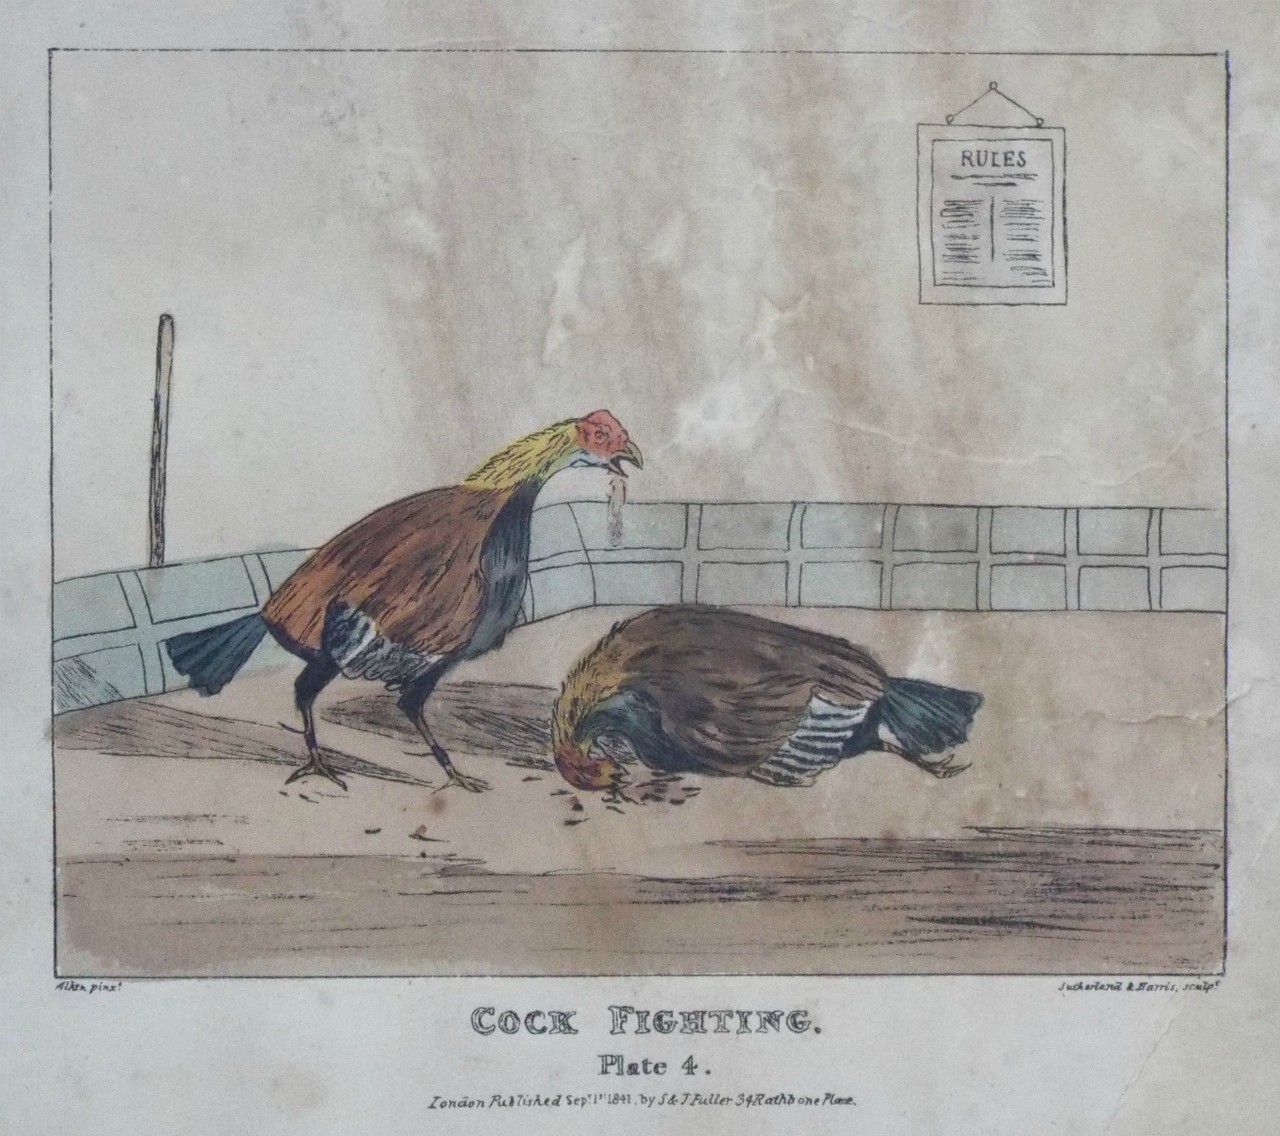 Lithograph - 4 Cock Fighting Plate 4. - Sutherland